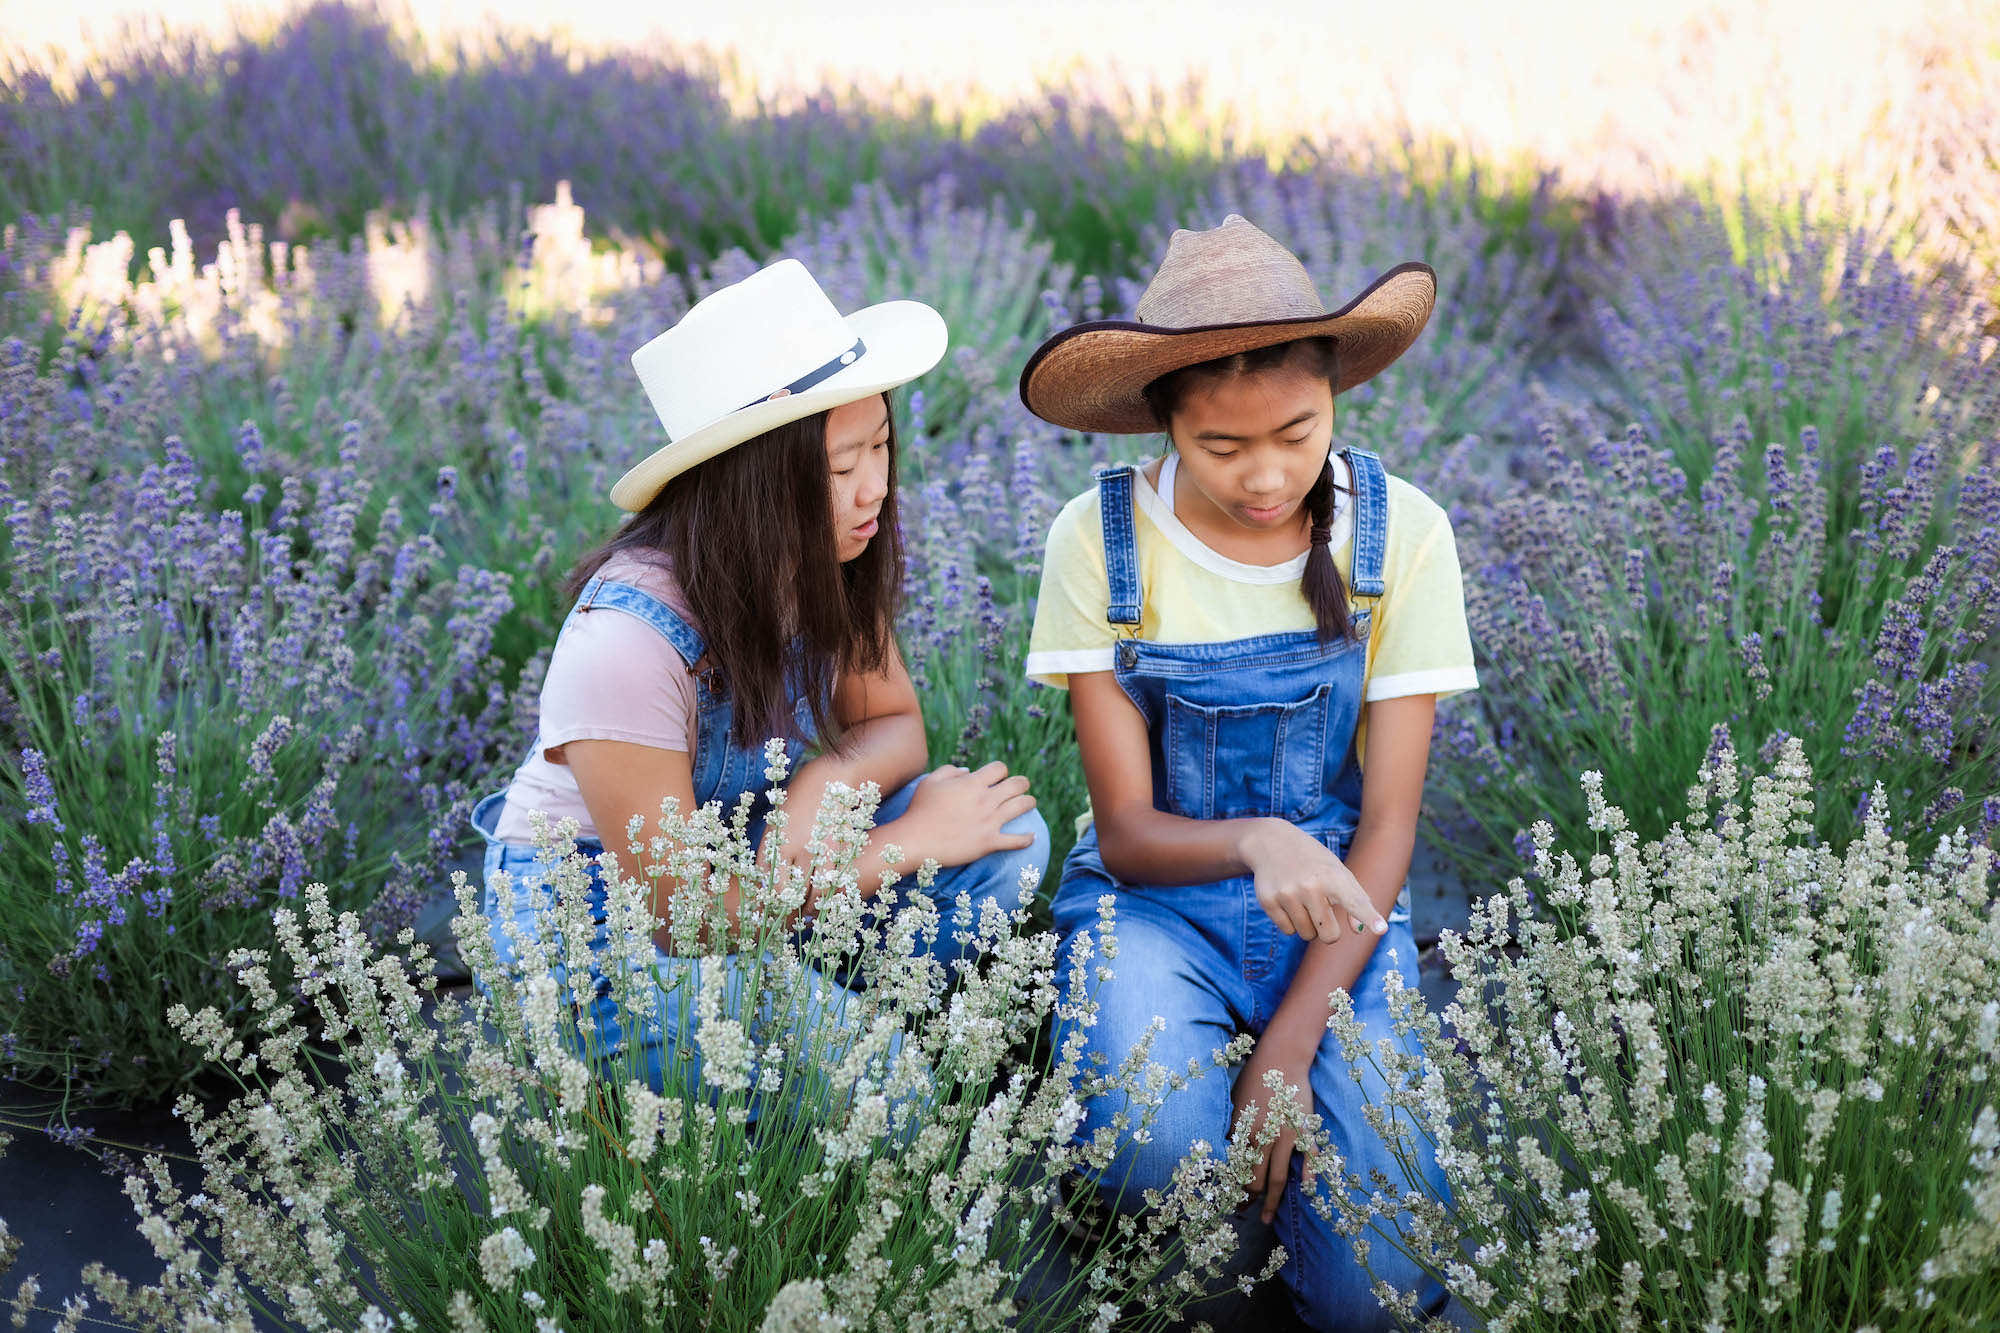 Women wearing hats and overalls in a lavender field